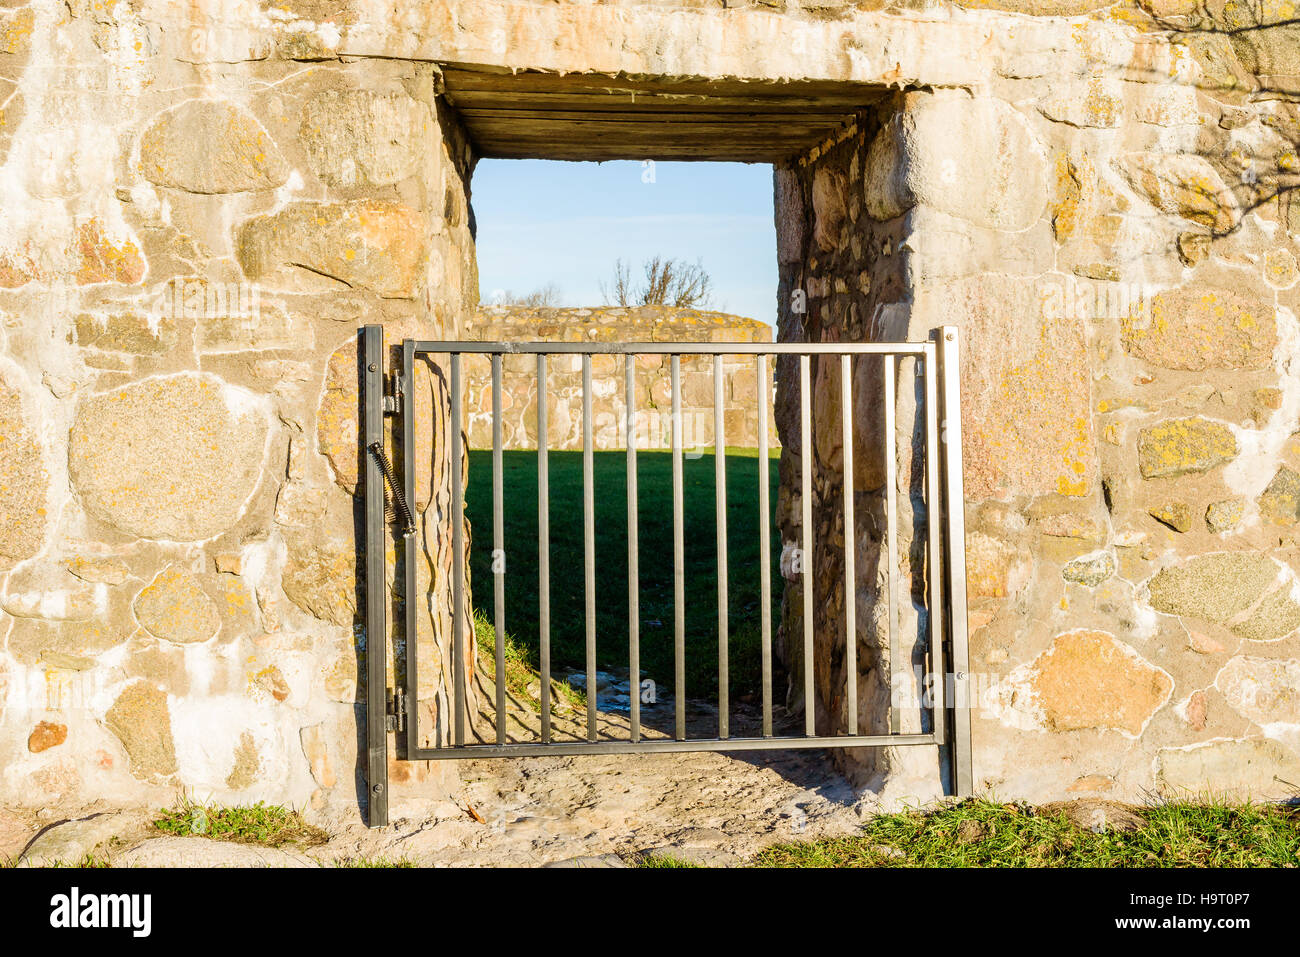 Closed metal gate in stone wall passage. Stock Photo